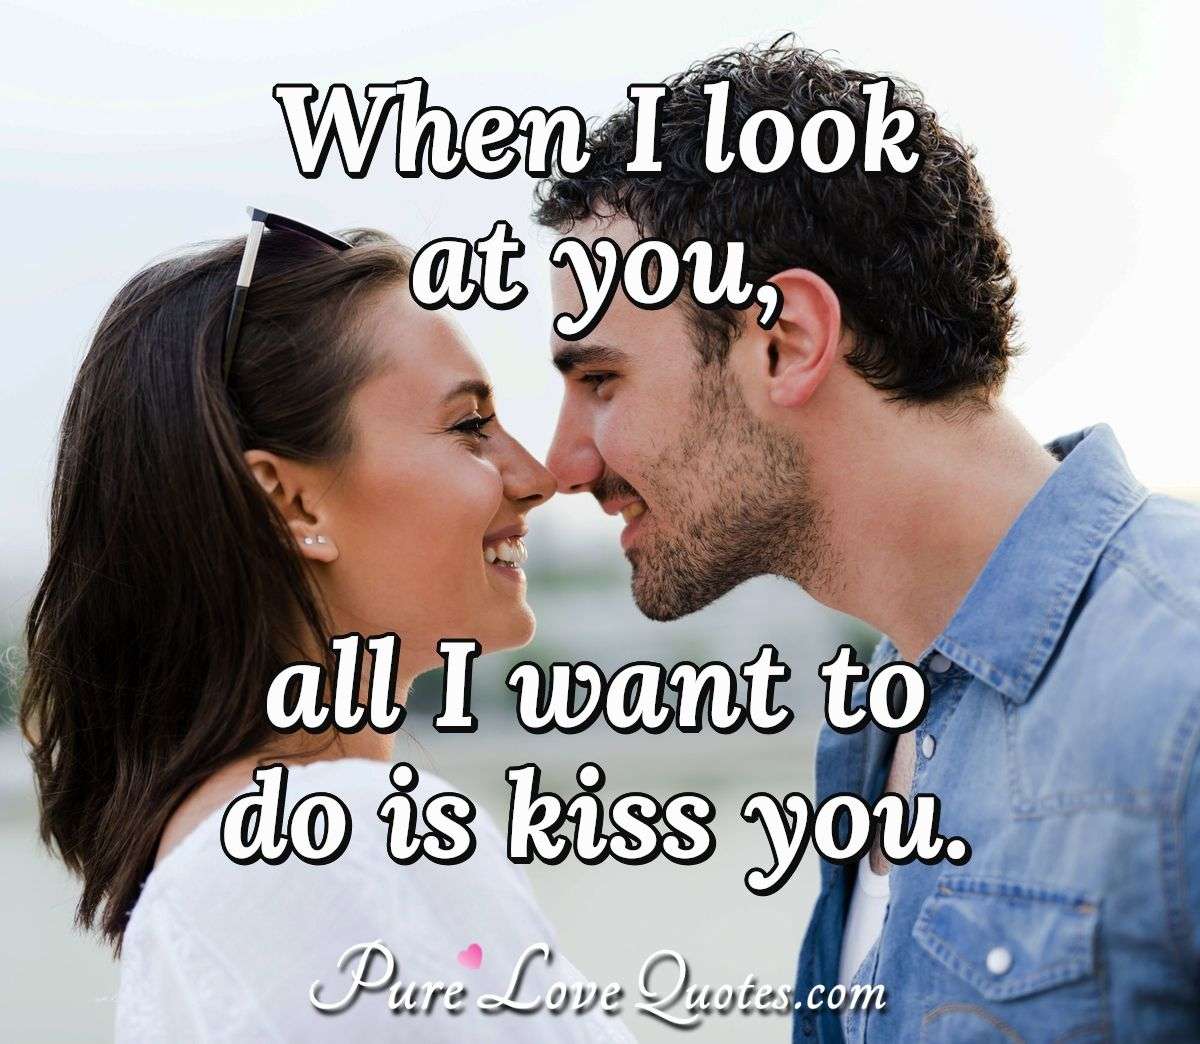 When I look at you, all I want to do is kiss you. - Anonymous